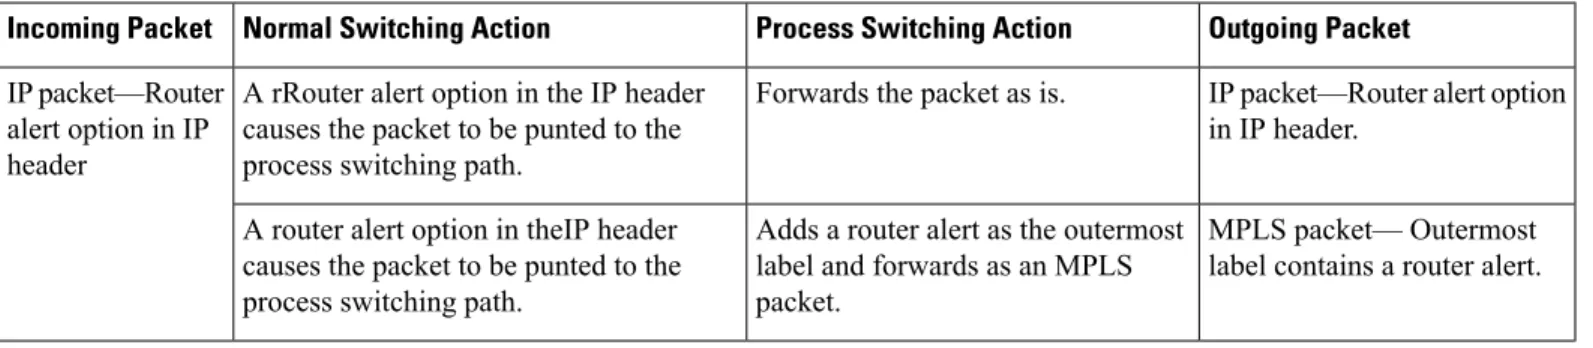 Table 11: Switching Path Process Handling of IP and MPLS Router Alert Packets